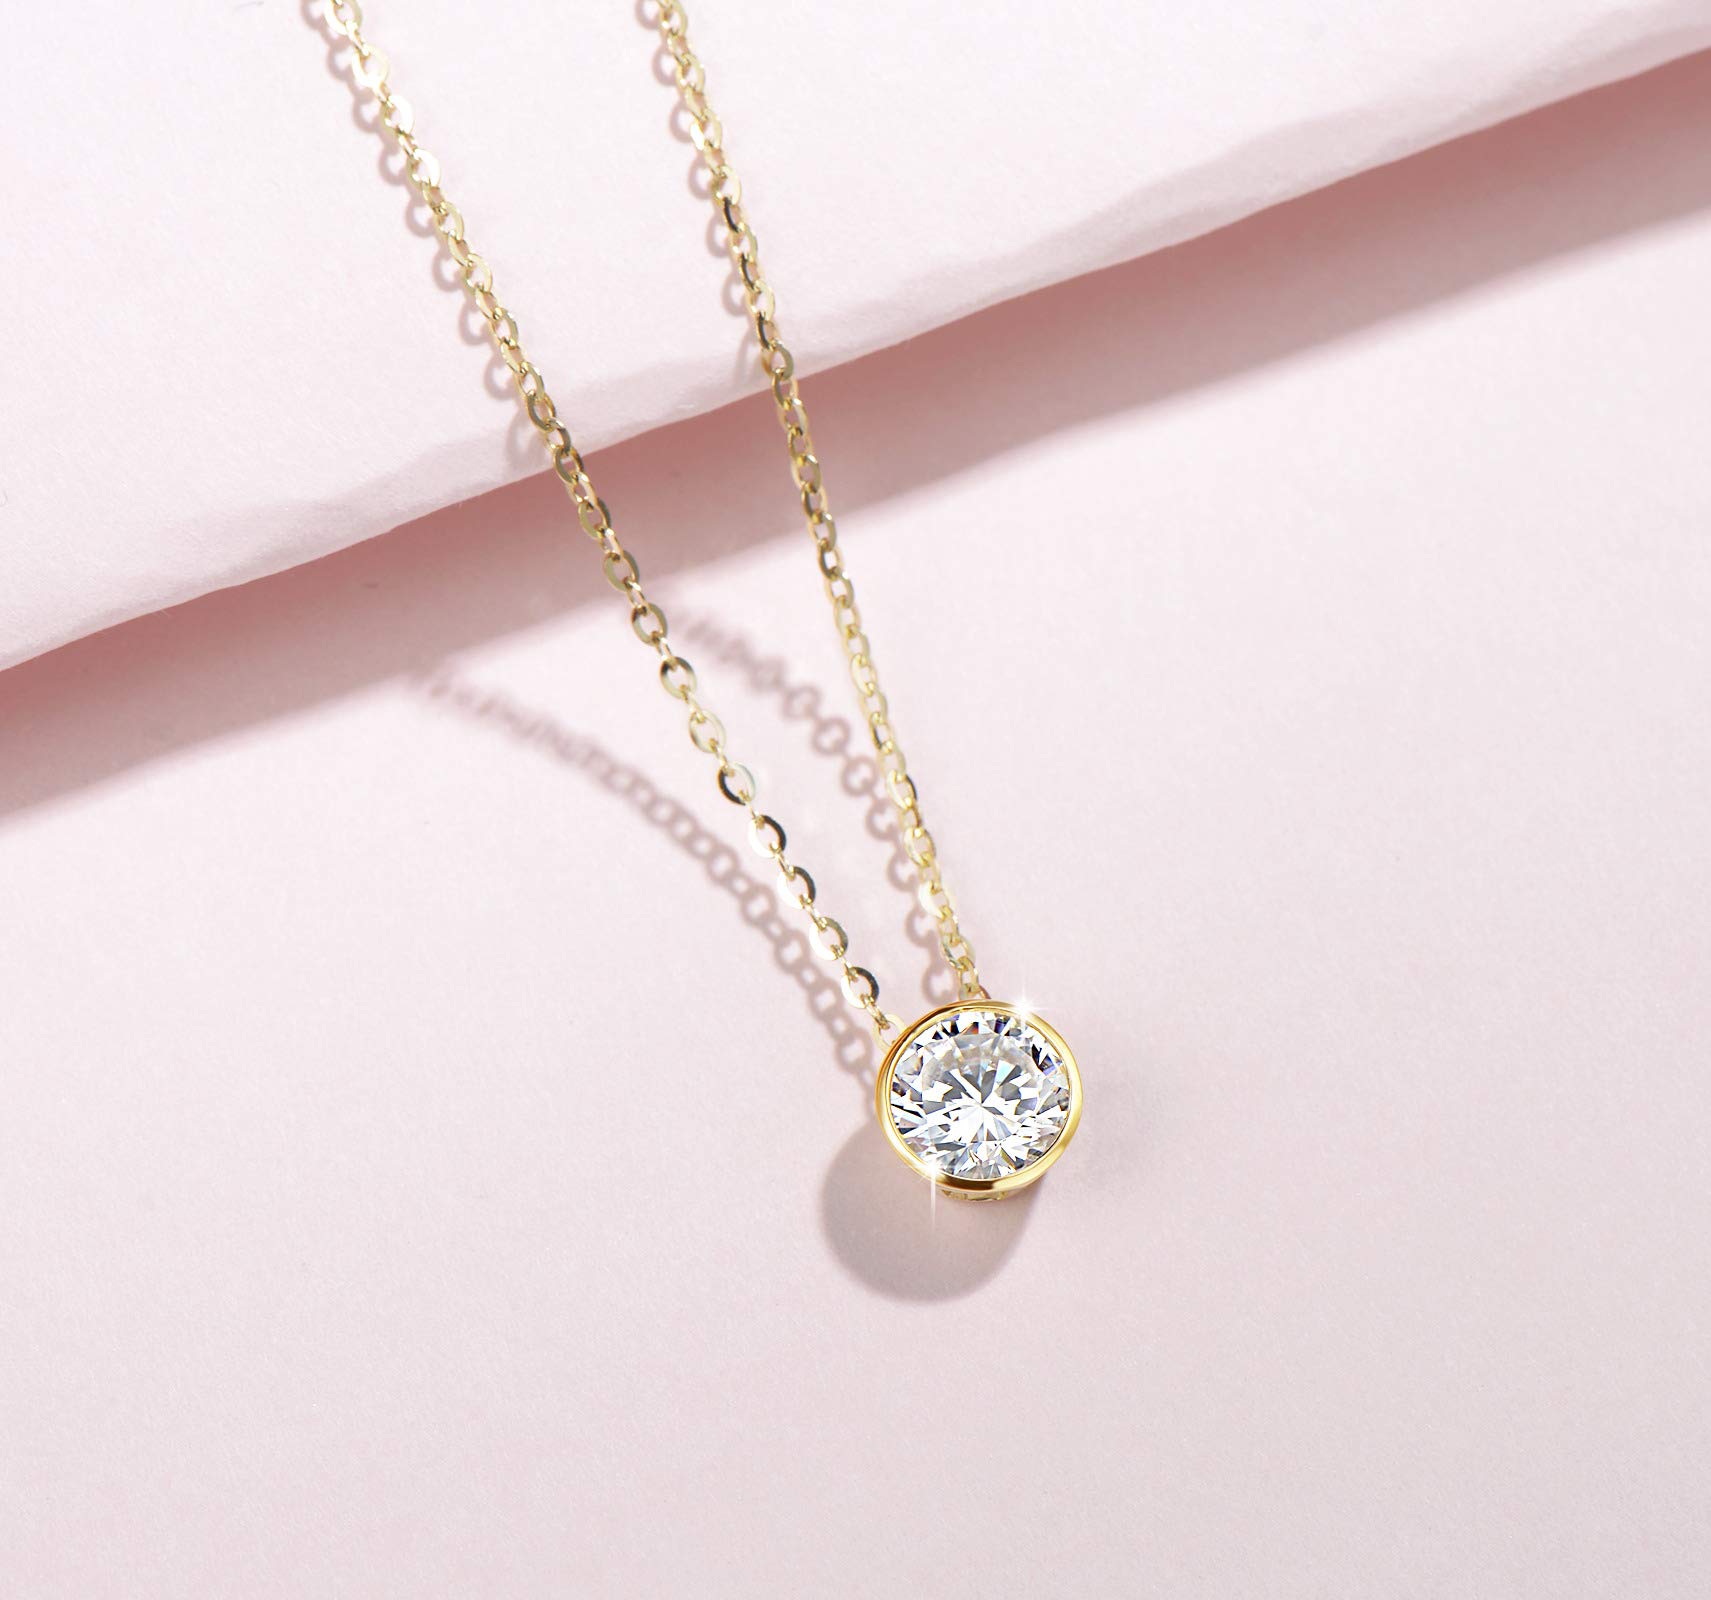 FANCIME 14k Solid Gold 1 Carat 6.5mm Moissanite Classic Bezel Set Solitaire Gemstone Pendant Necklace for Women Girls, Gold Chain 16 + 2 inch Extender